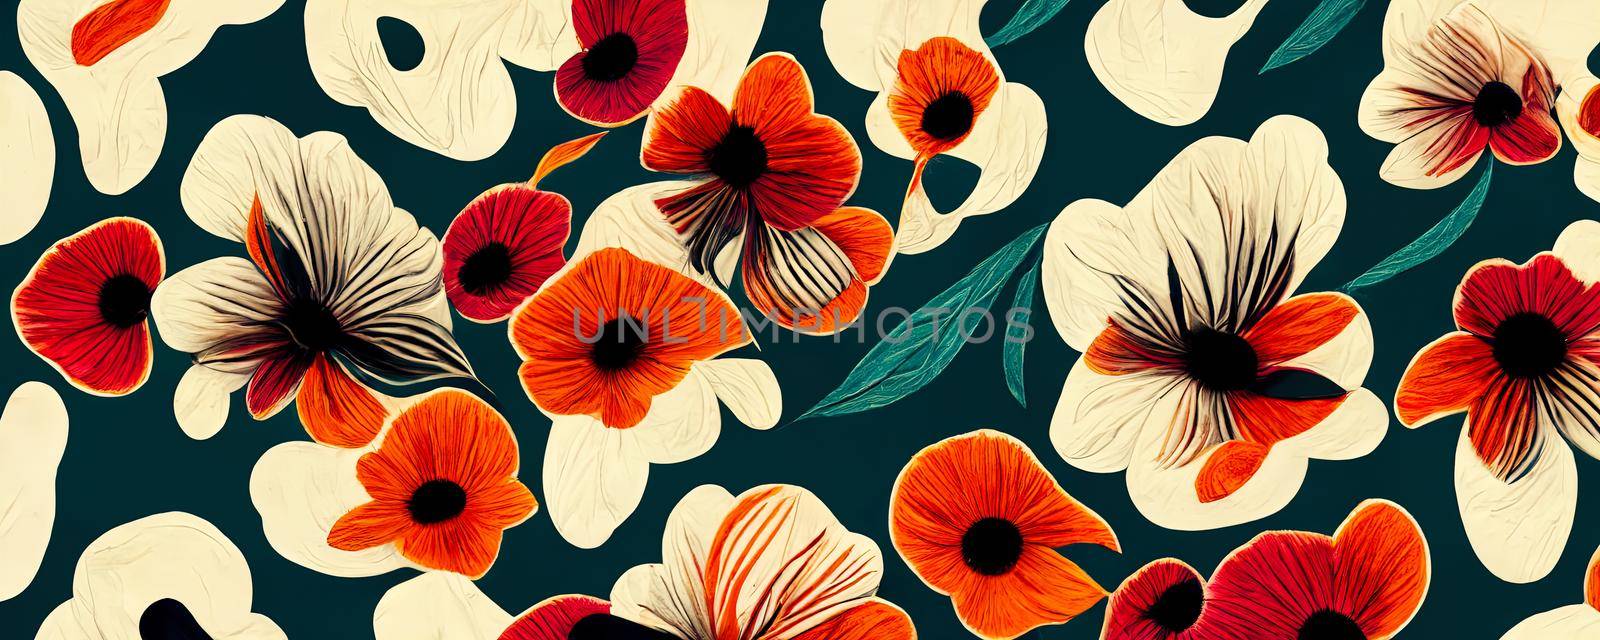 abstract flower illustration, creative flower background by TRMK